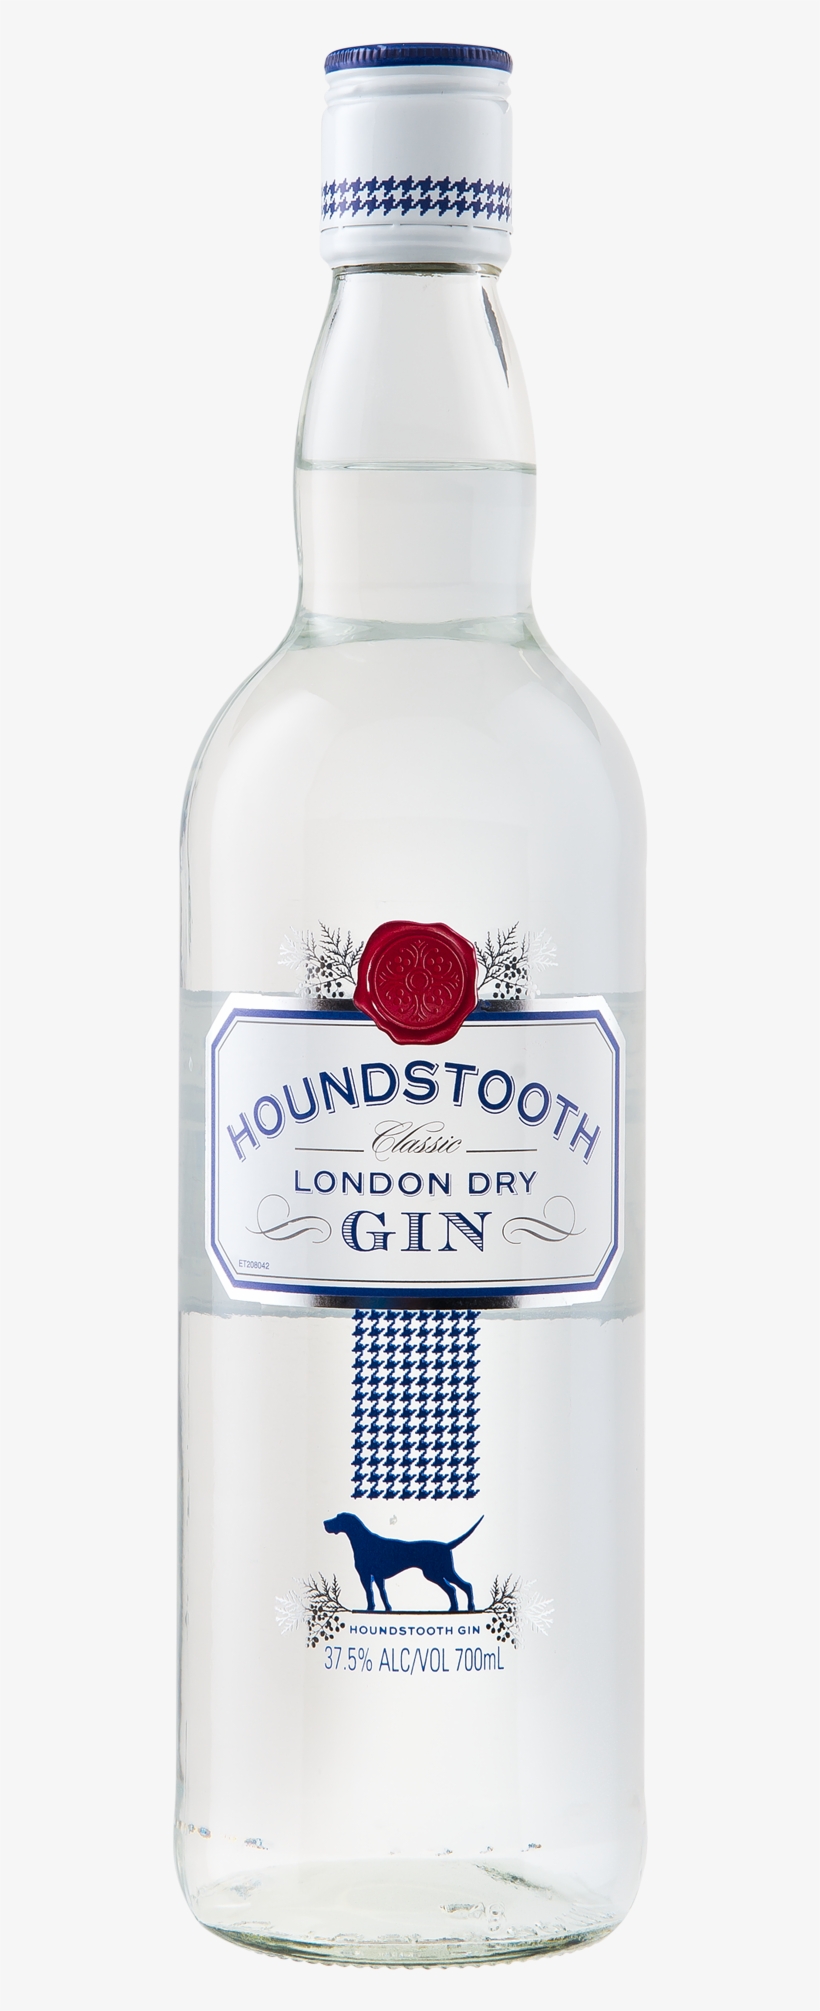 Houndstooth Gin 700ml - Dove Shower Foam Shea Butter With Warm Vanilla, transparent png #2955298